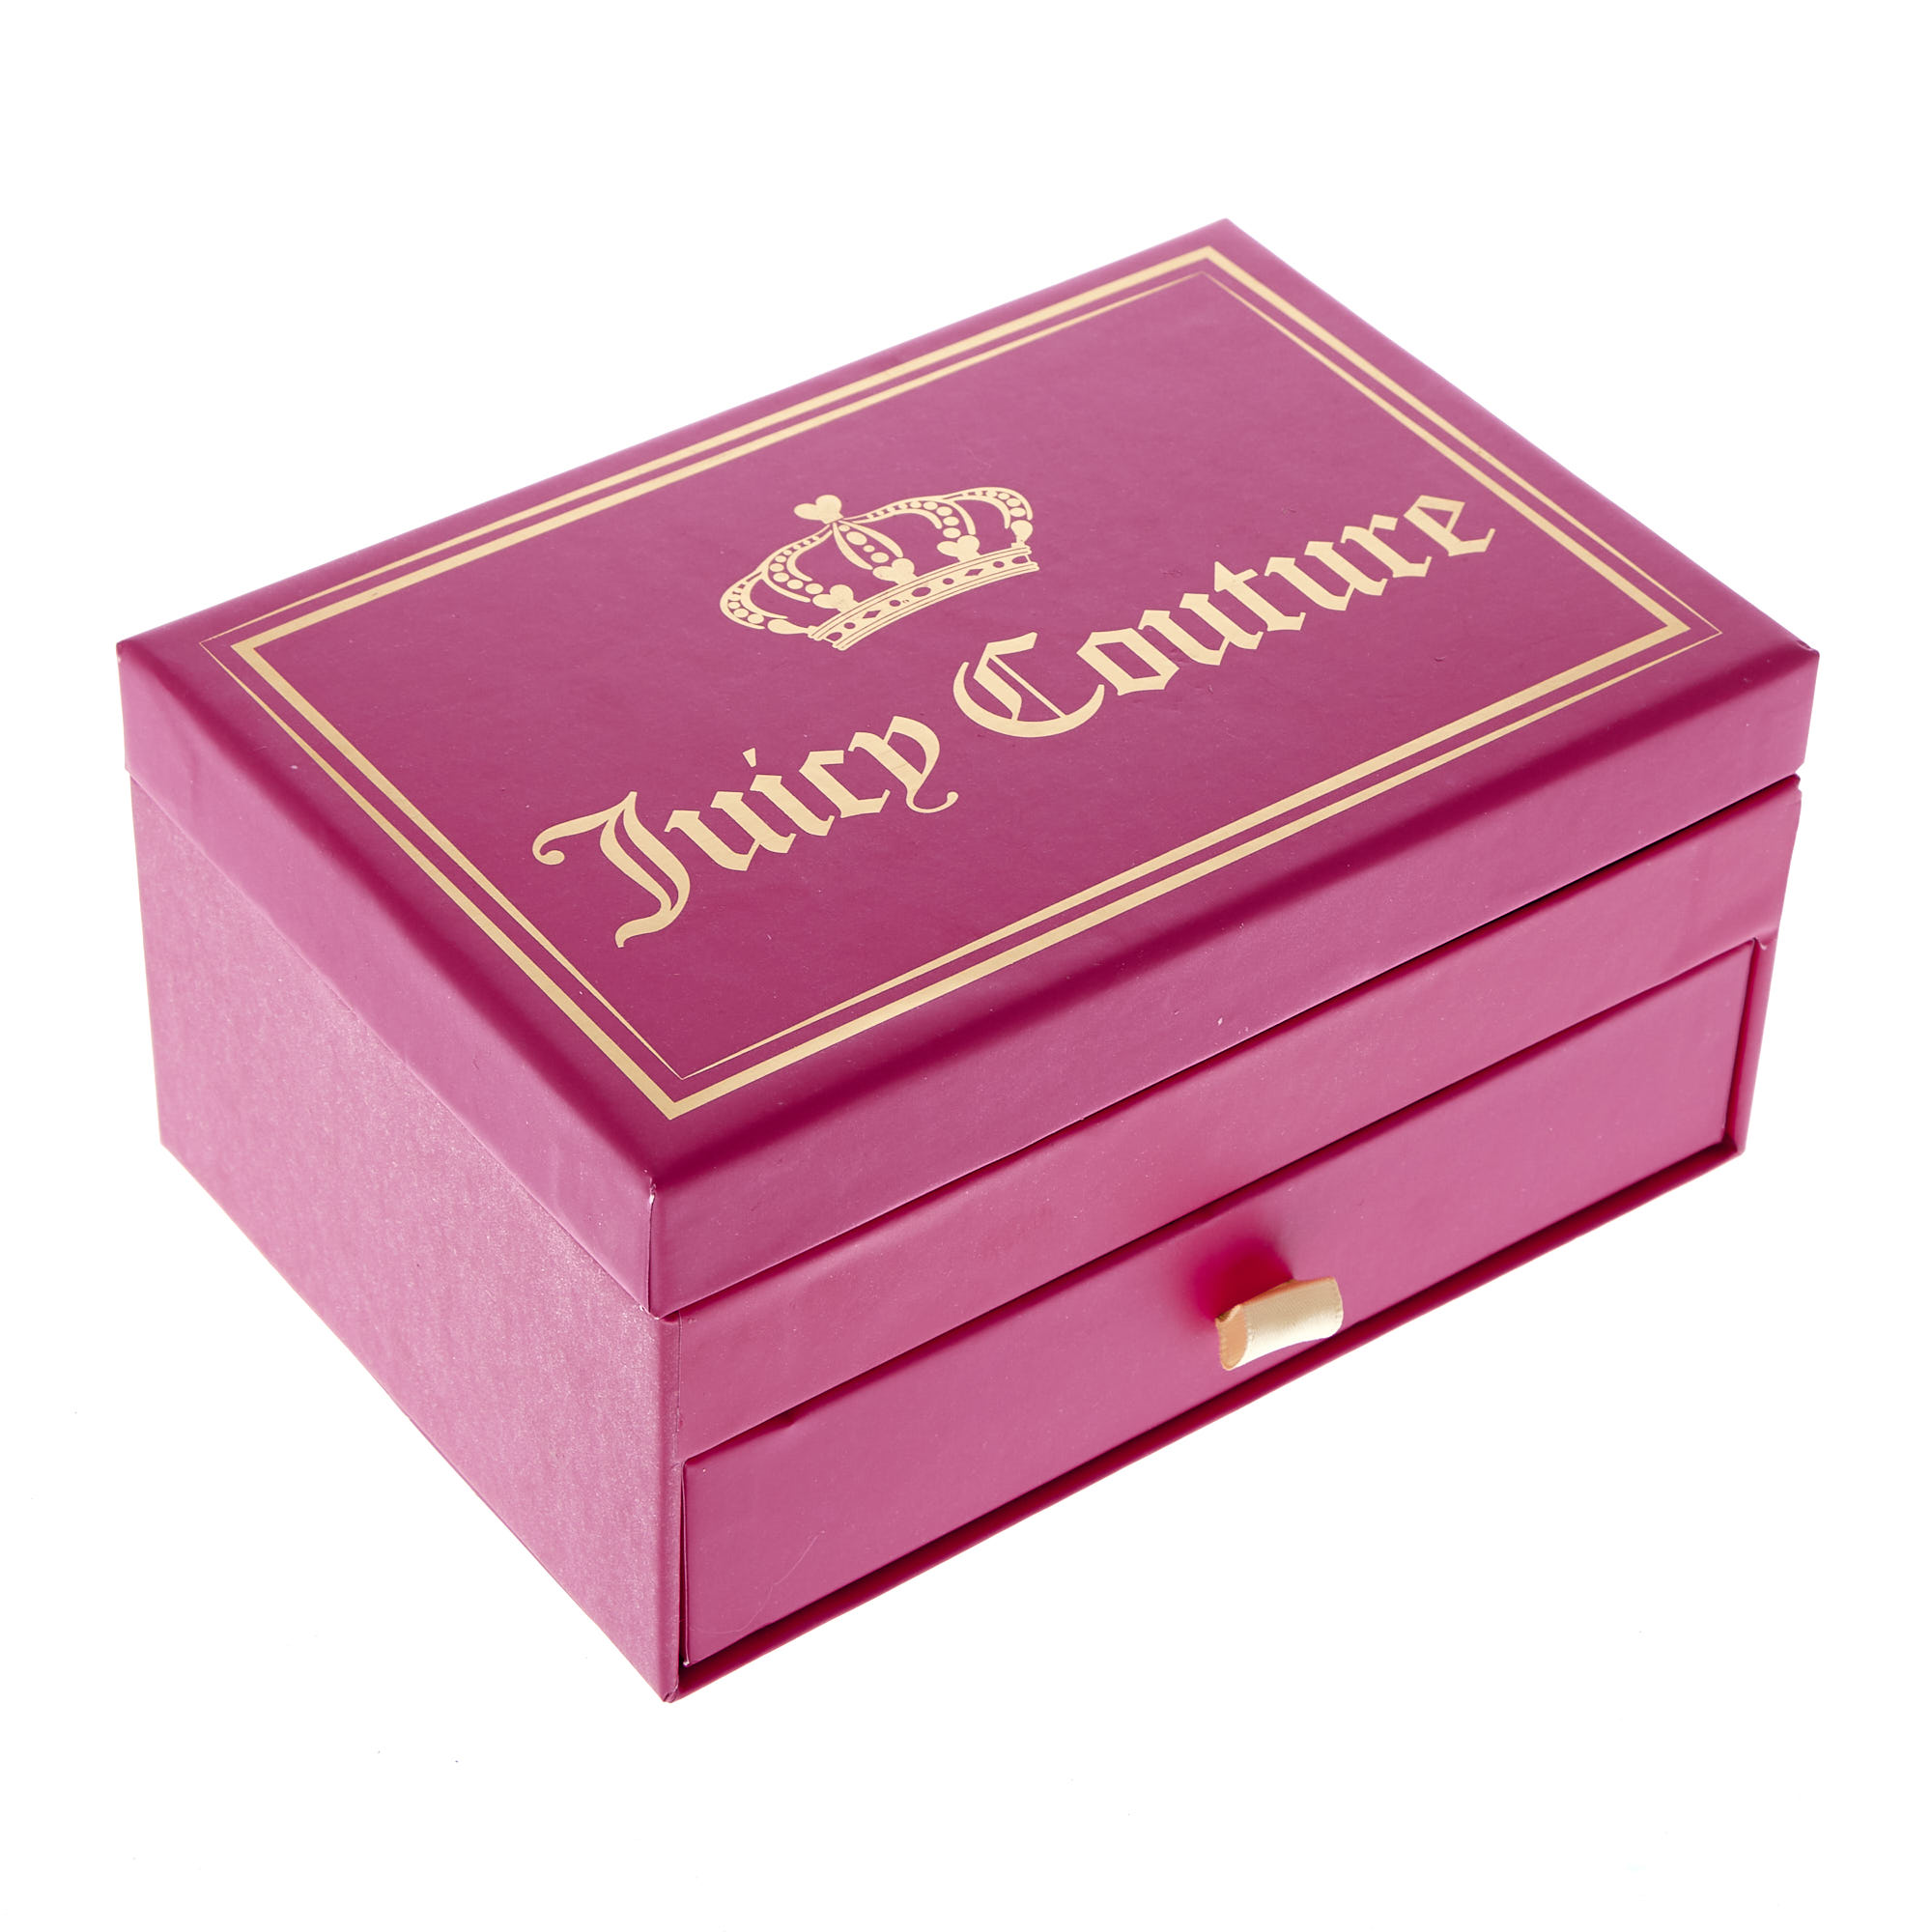 Juicy Couture Glamour Box Jewellery Box